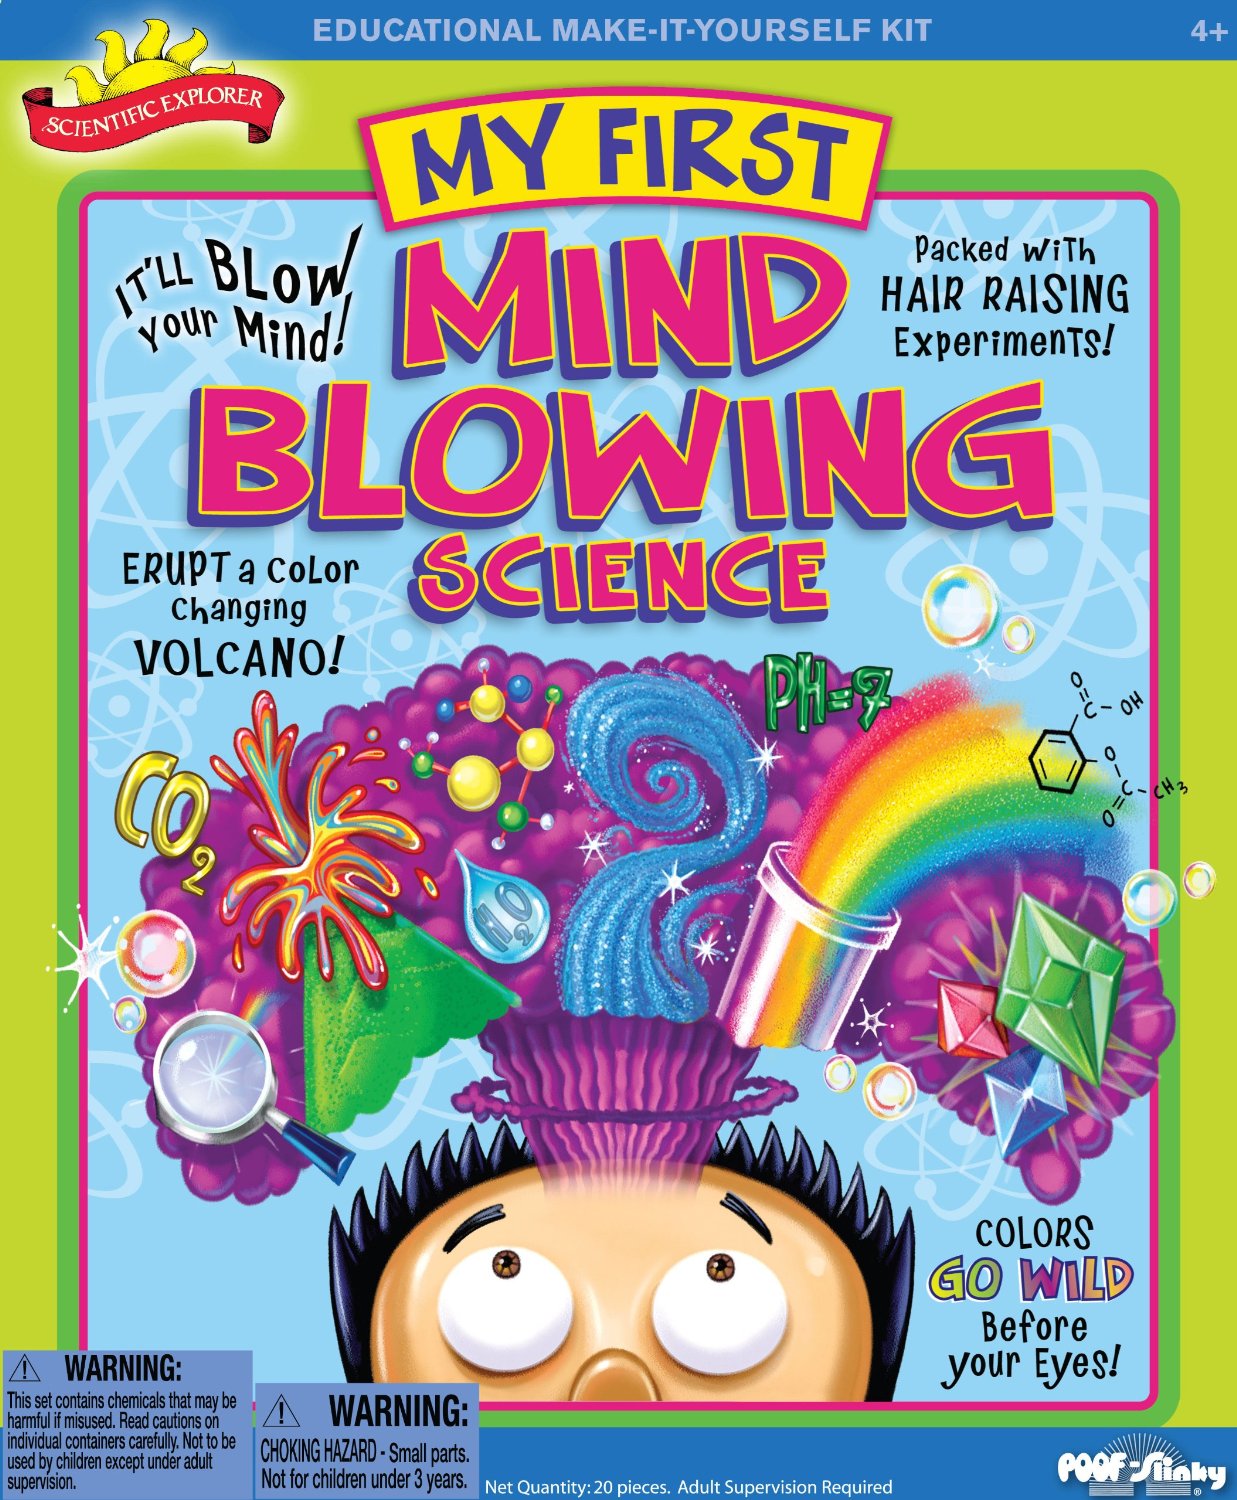 My First Mind-Blowing Science Kit